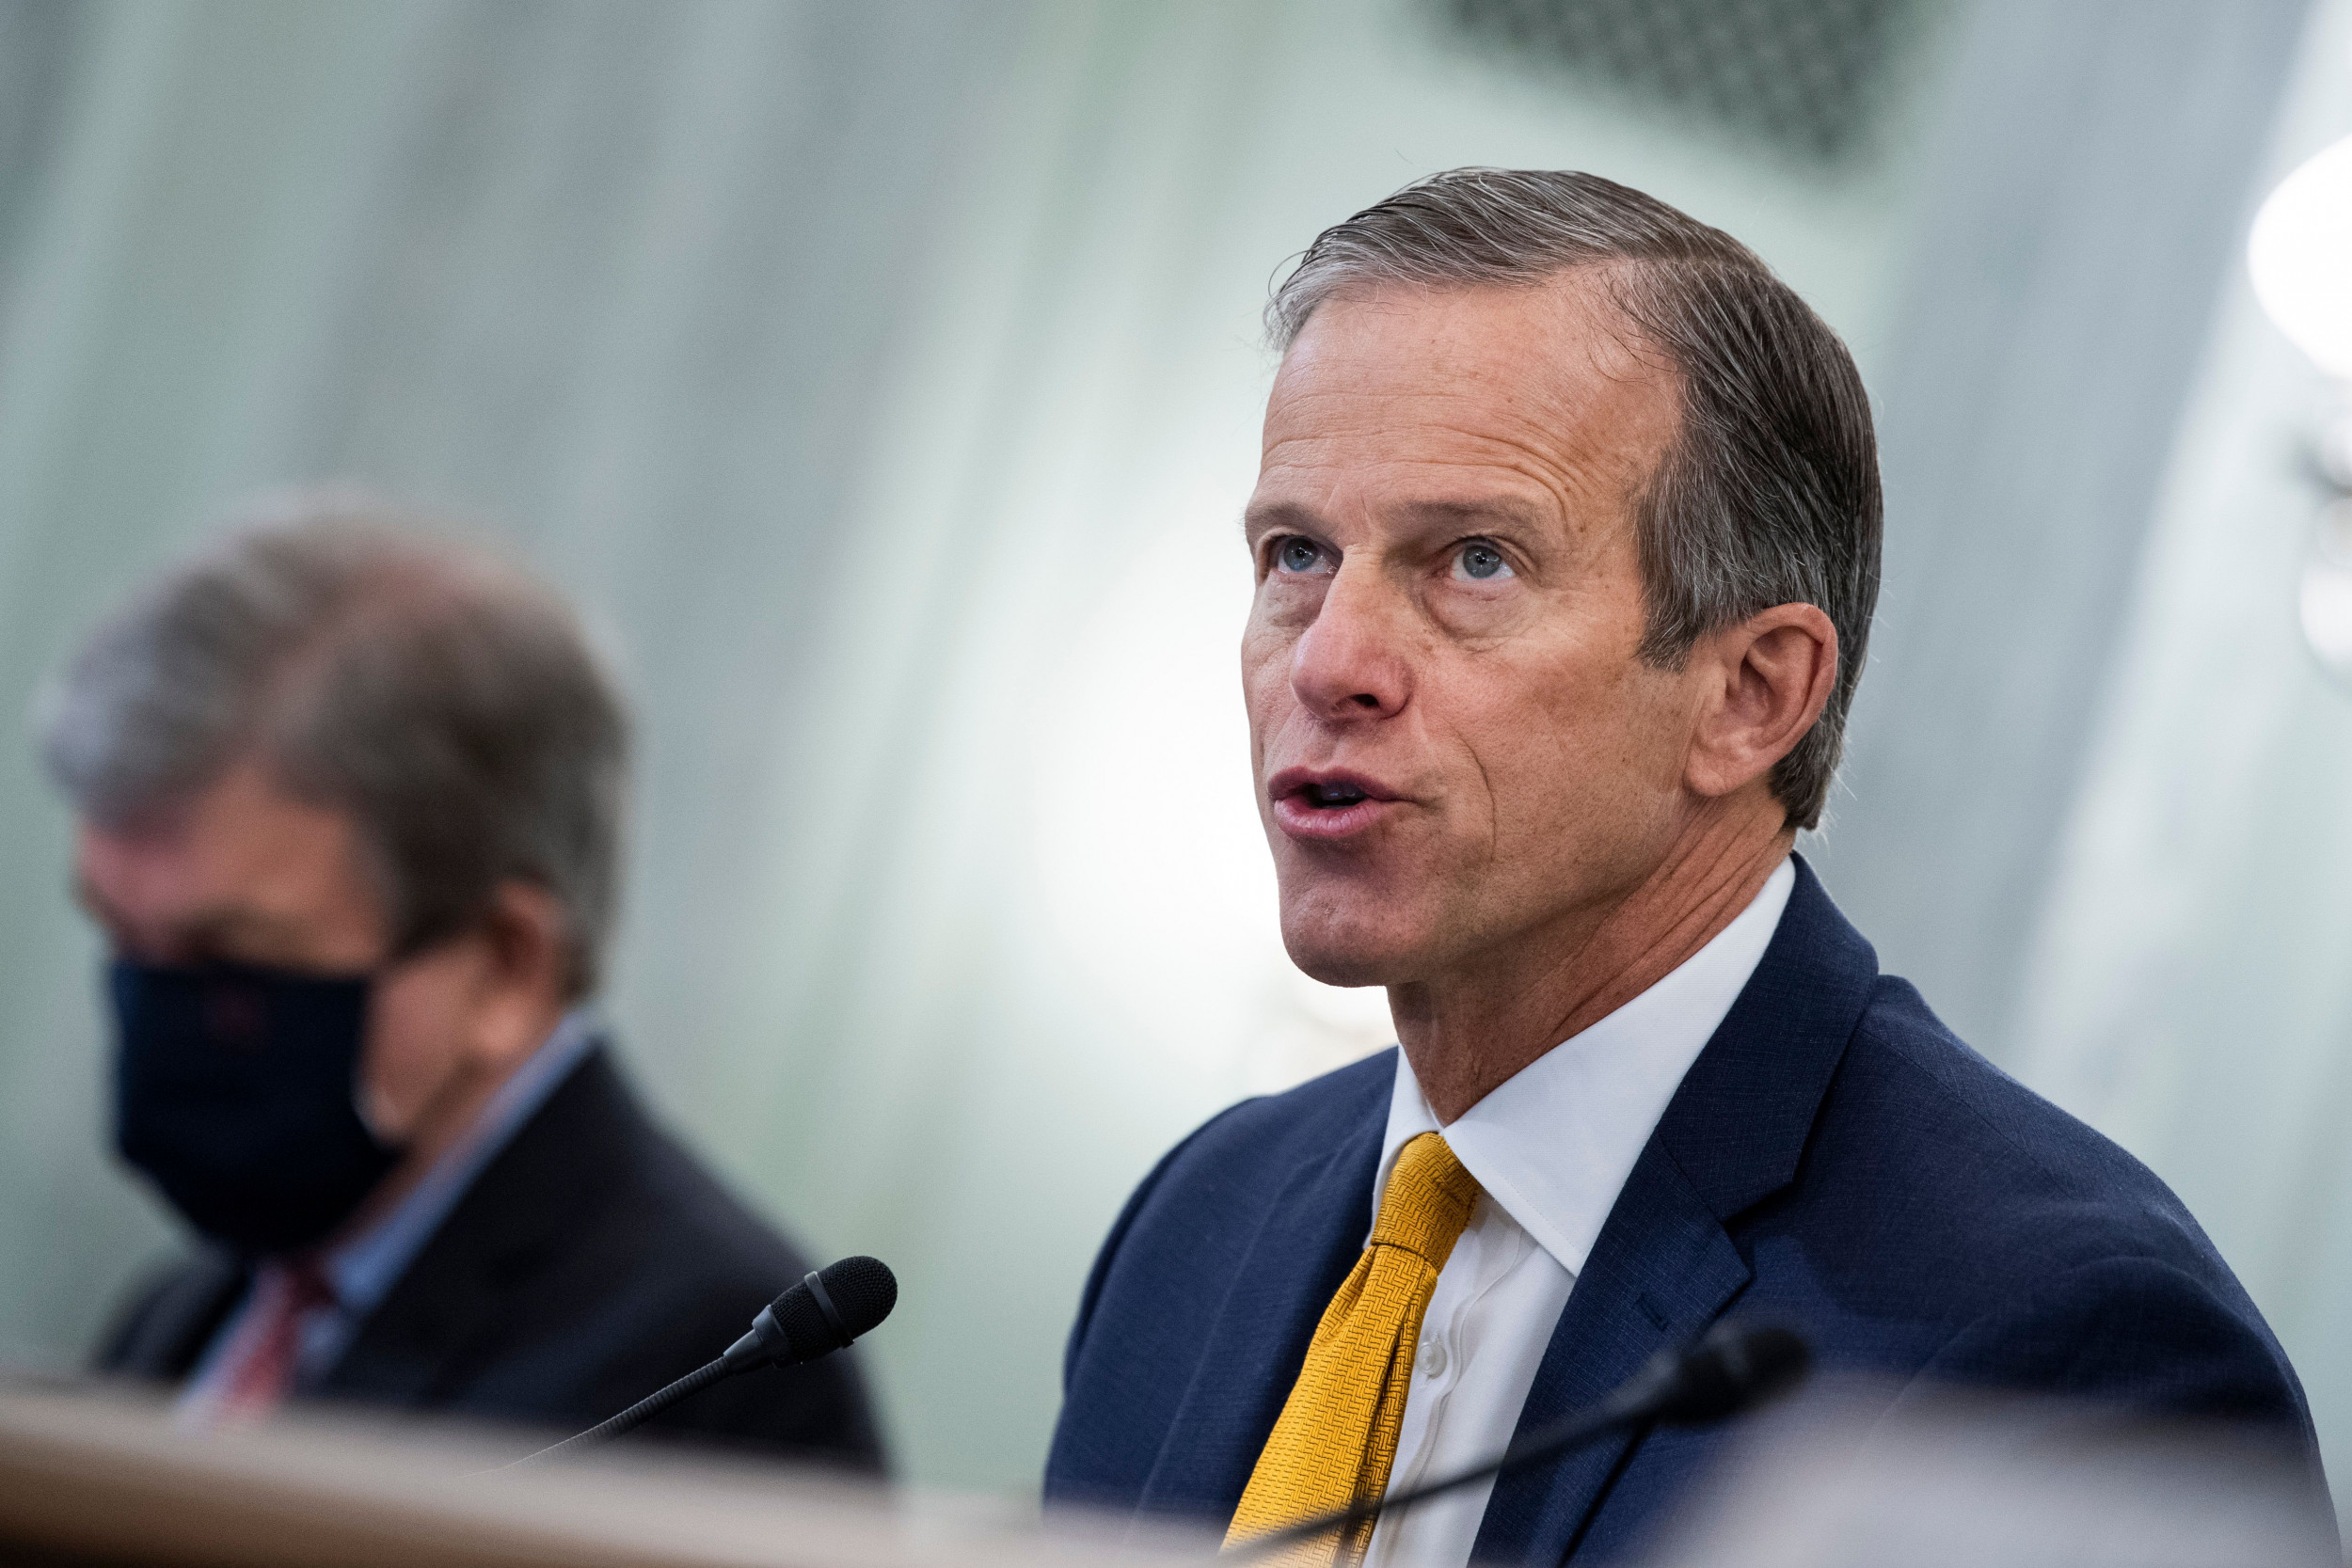 Senator John Thune, who opposes the $ 15 minimum wage, says he earned $ 6 when he was a child – $ 24 with inflation